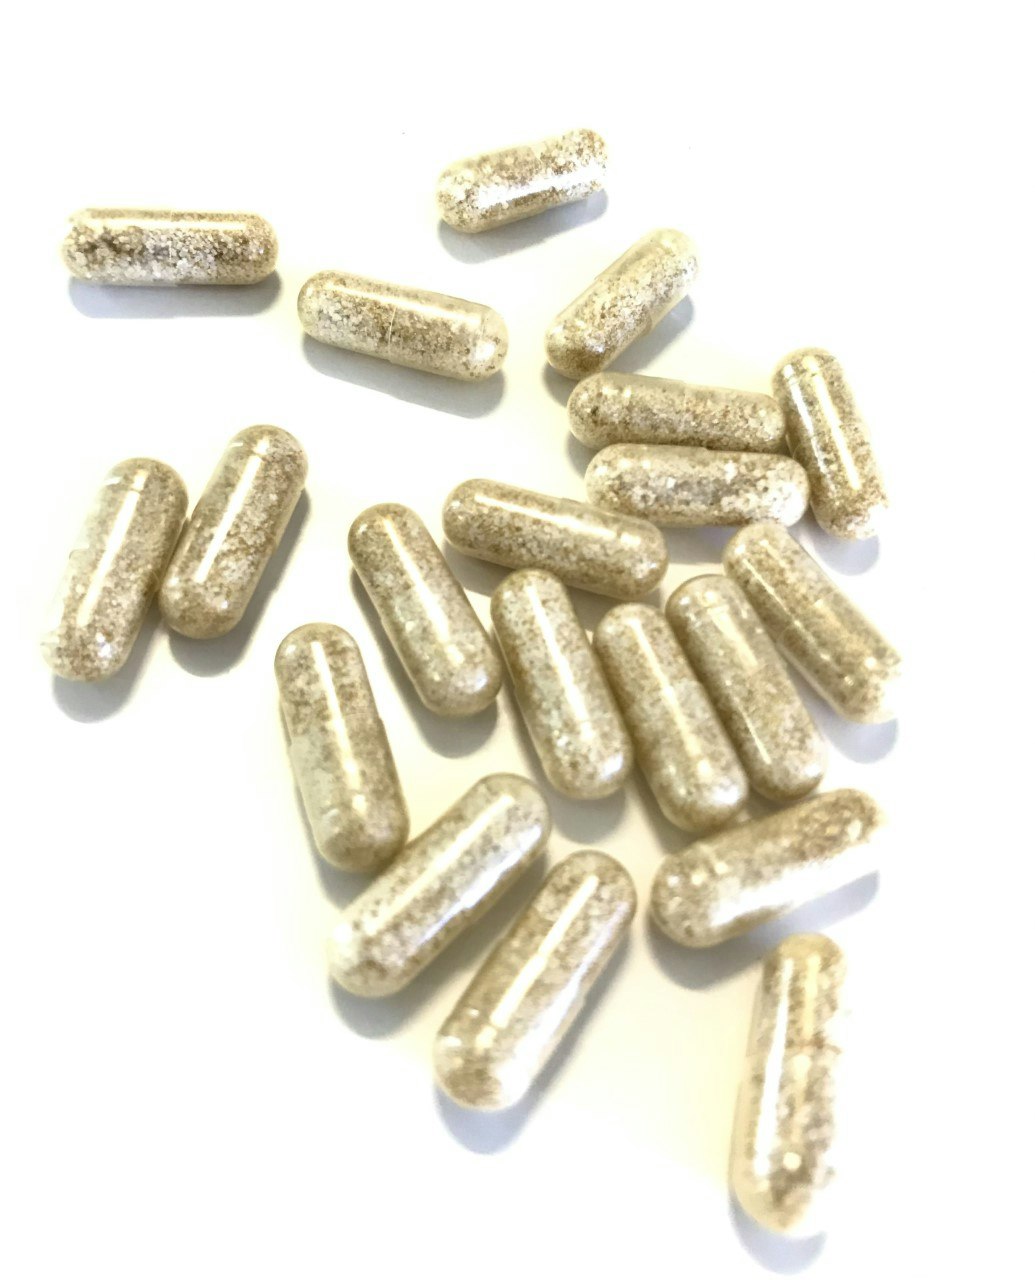 Nutrition capsules for DUMMIES